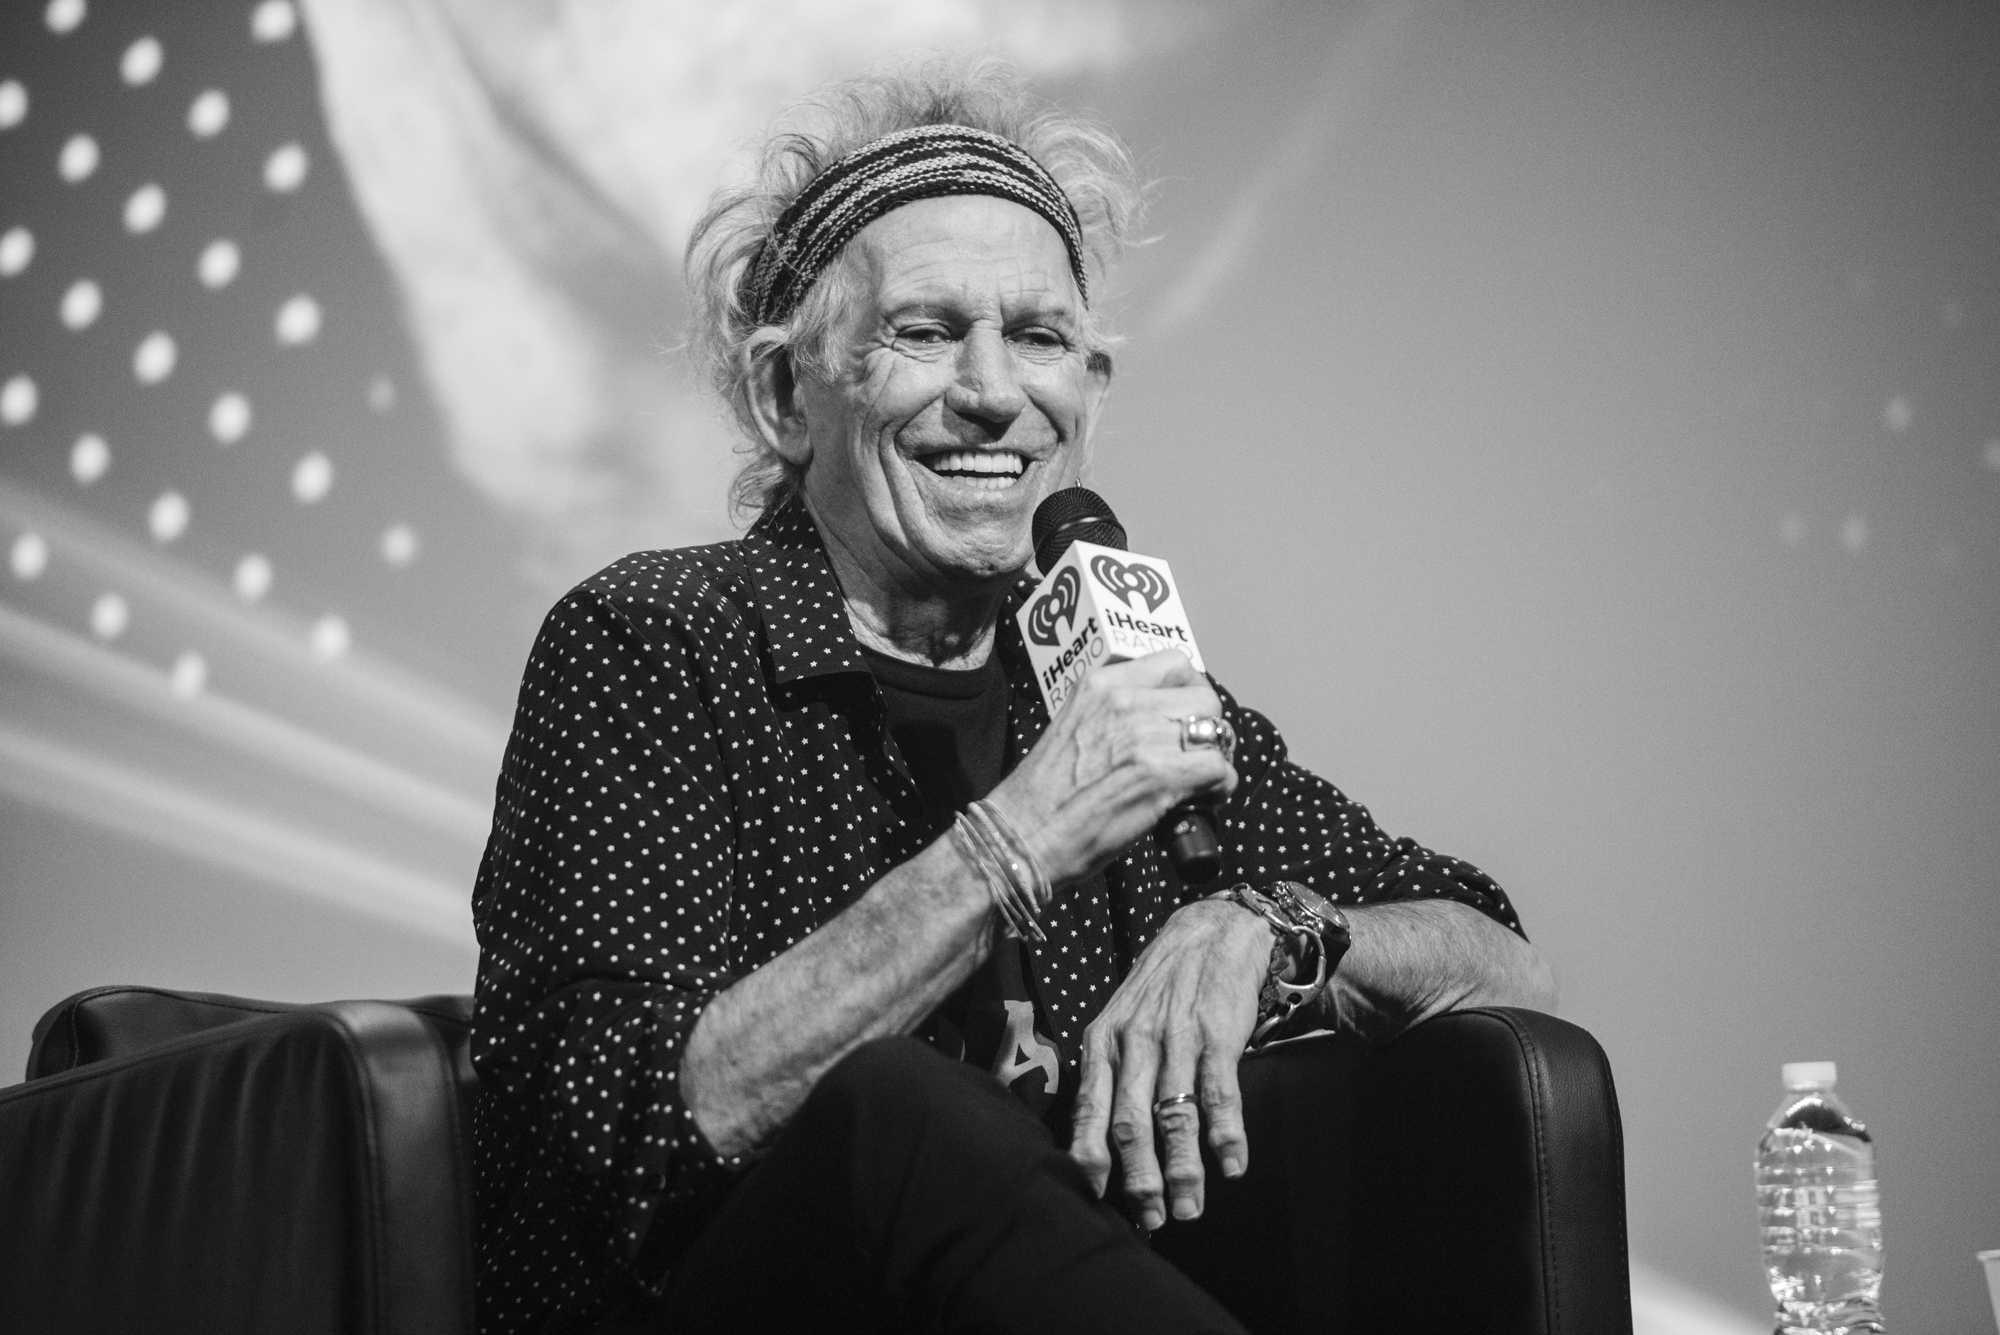 iHeartRadio ICONS with Jim Kerr interviewing Keith Richards. Photo by: XX for iHeartRadio